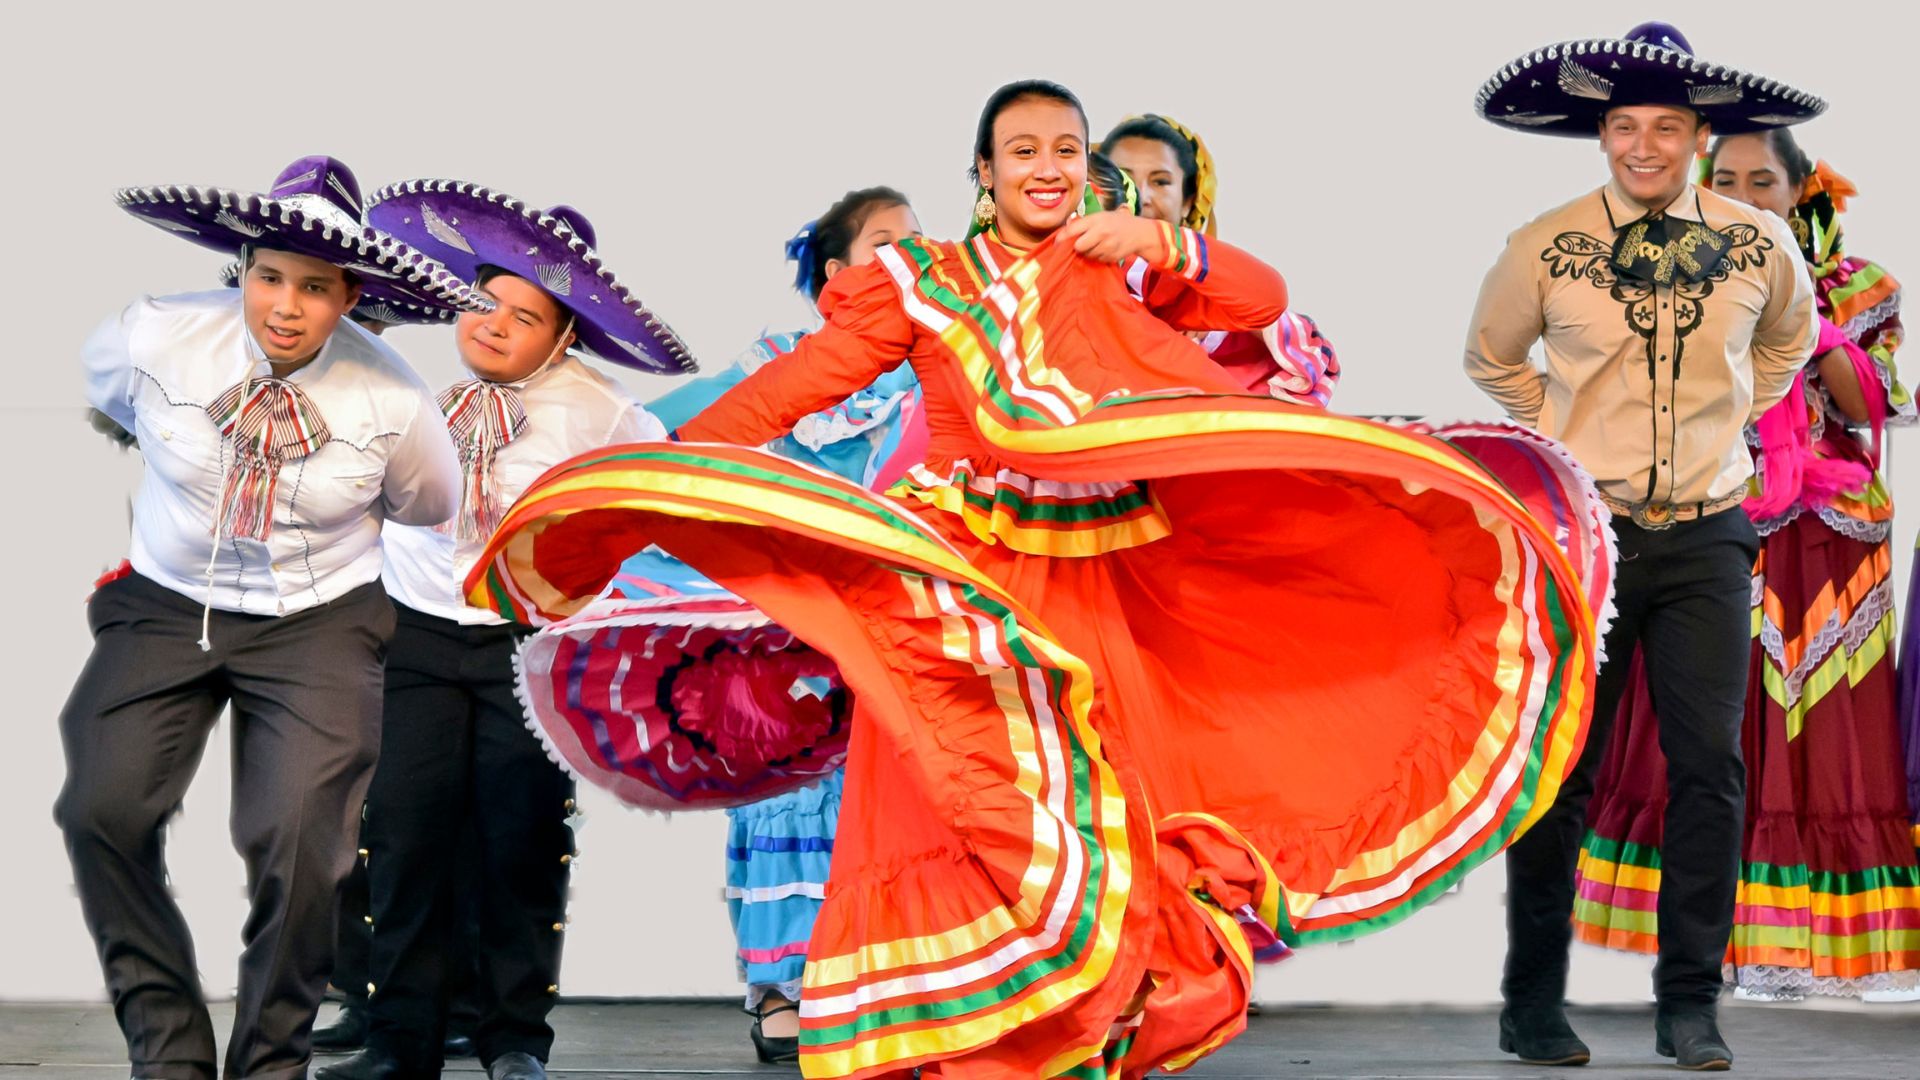 Mexican performers dance at Festival of Nations in St. Louis.